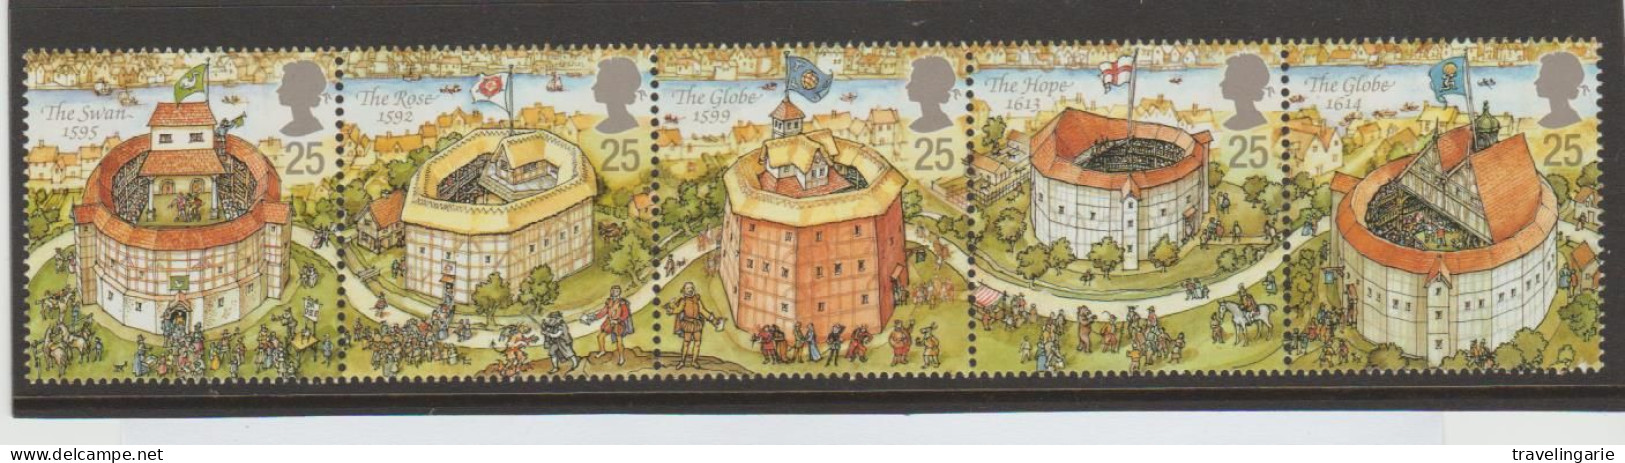 Great Britain 1995 Opening Shakespeare's Globe Theater MNH ** - Unused Stamps